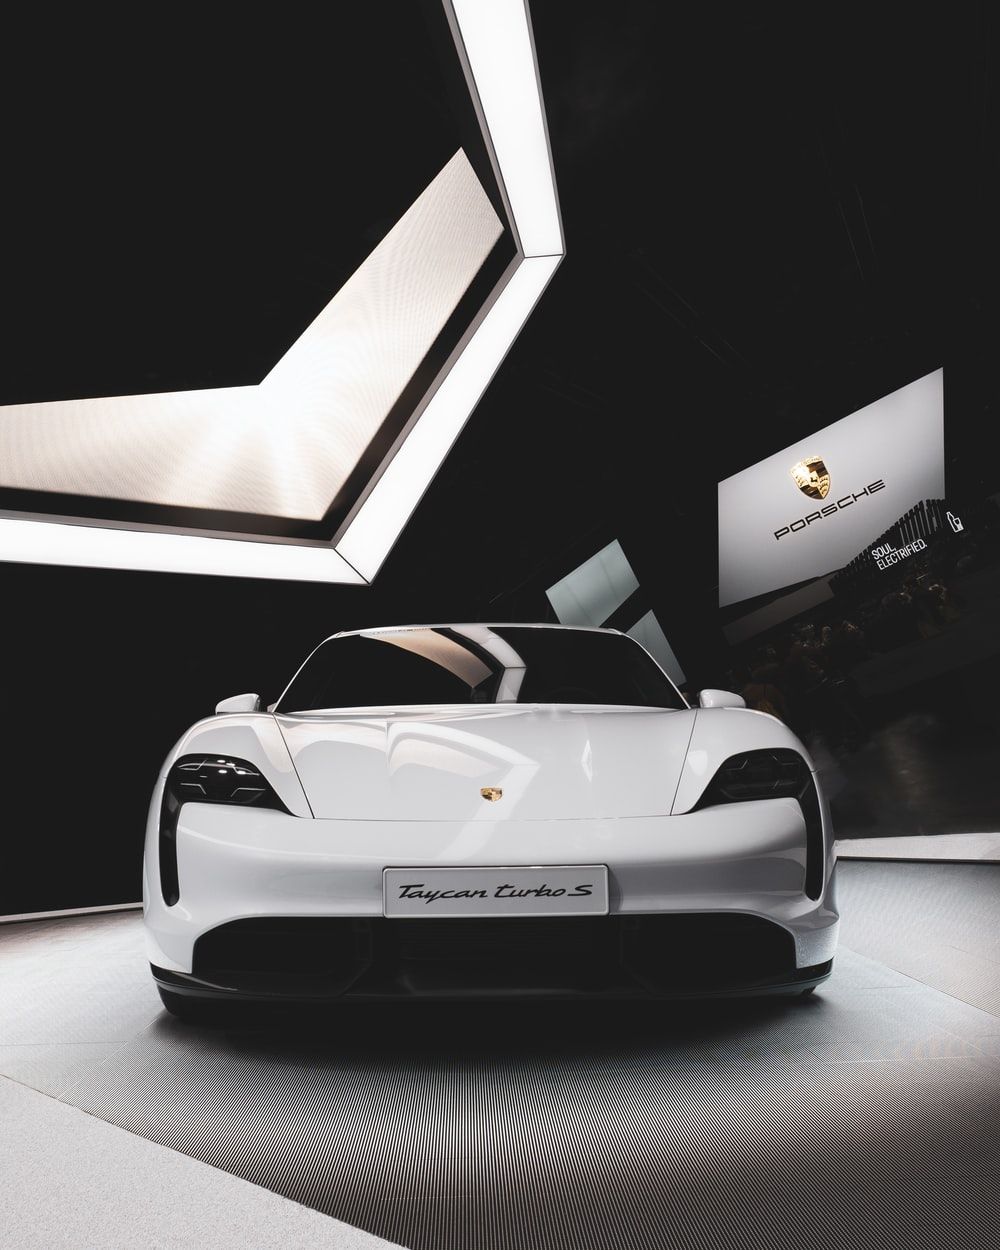 Porsche Taycan Picture. Download Free Image